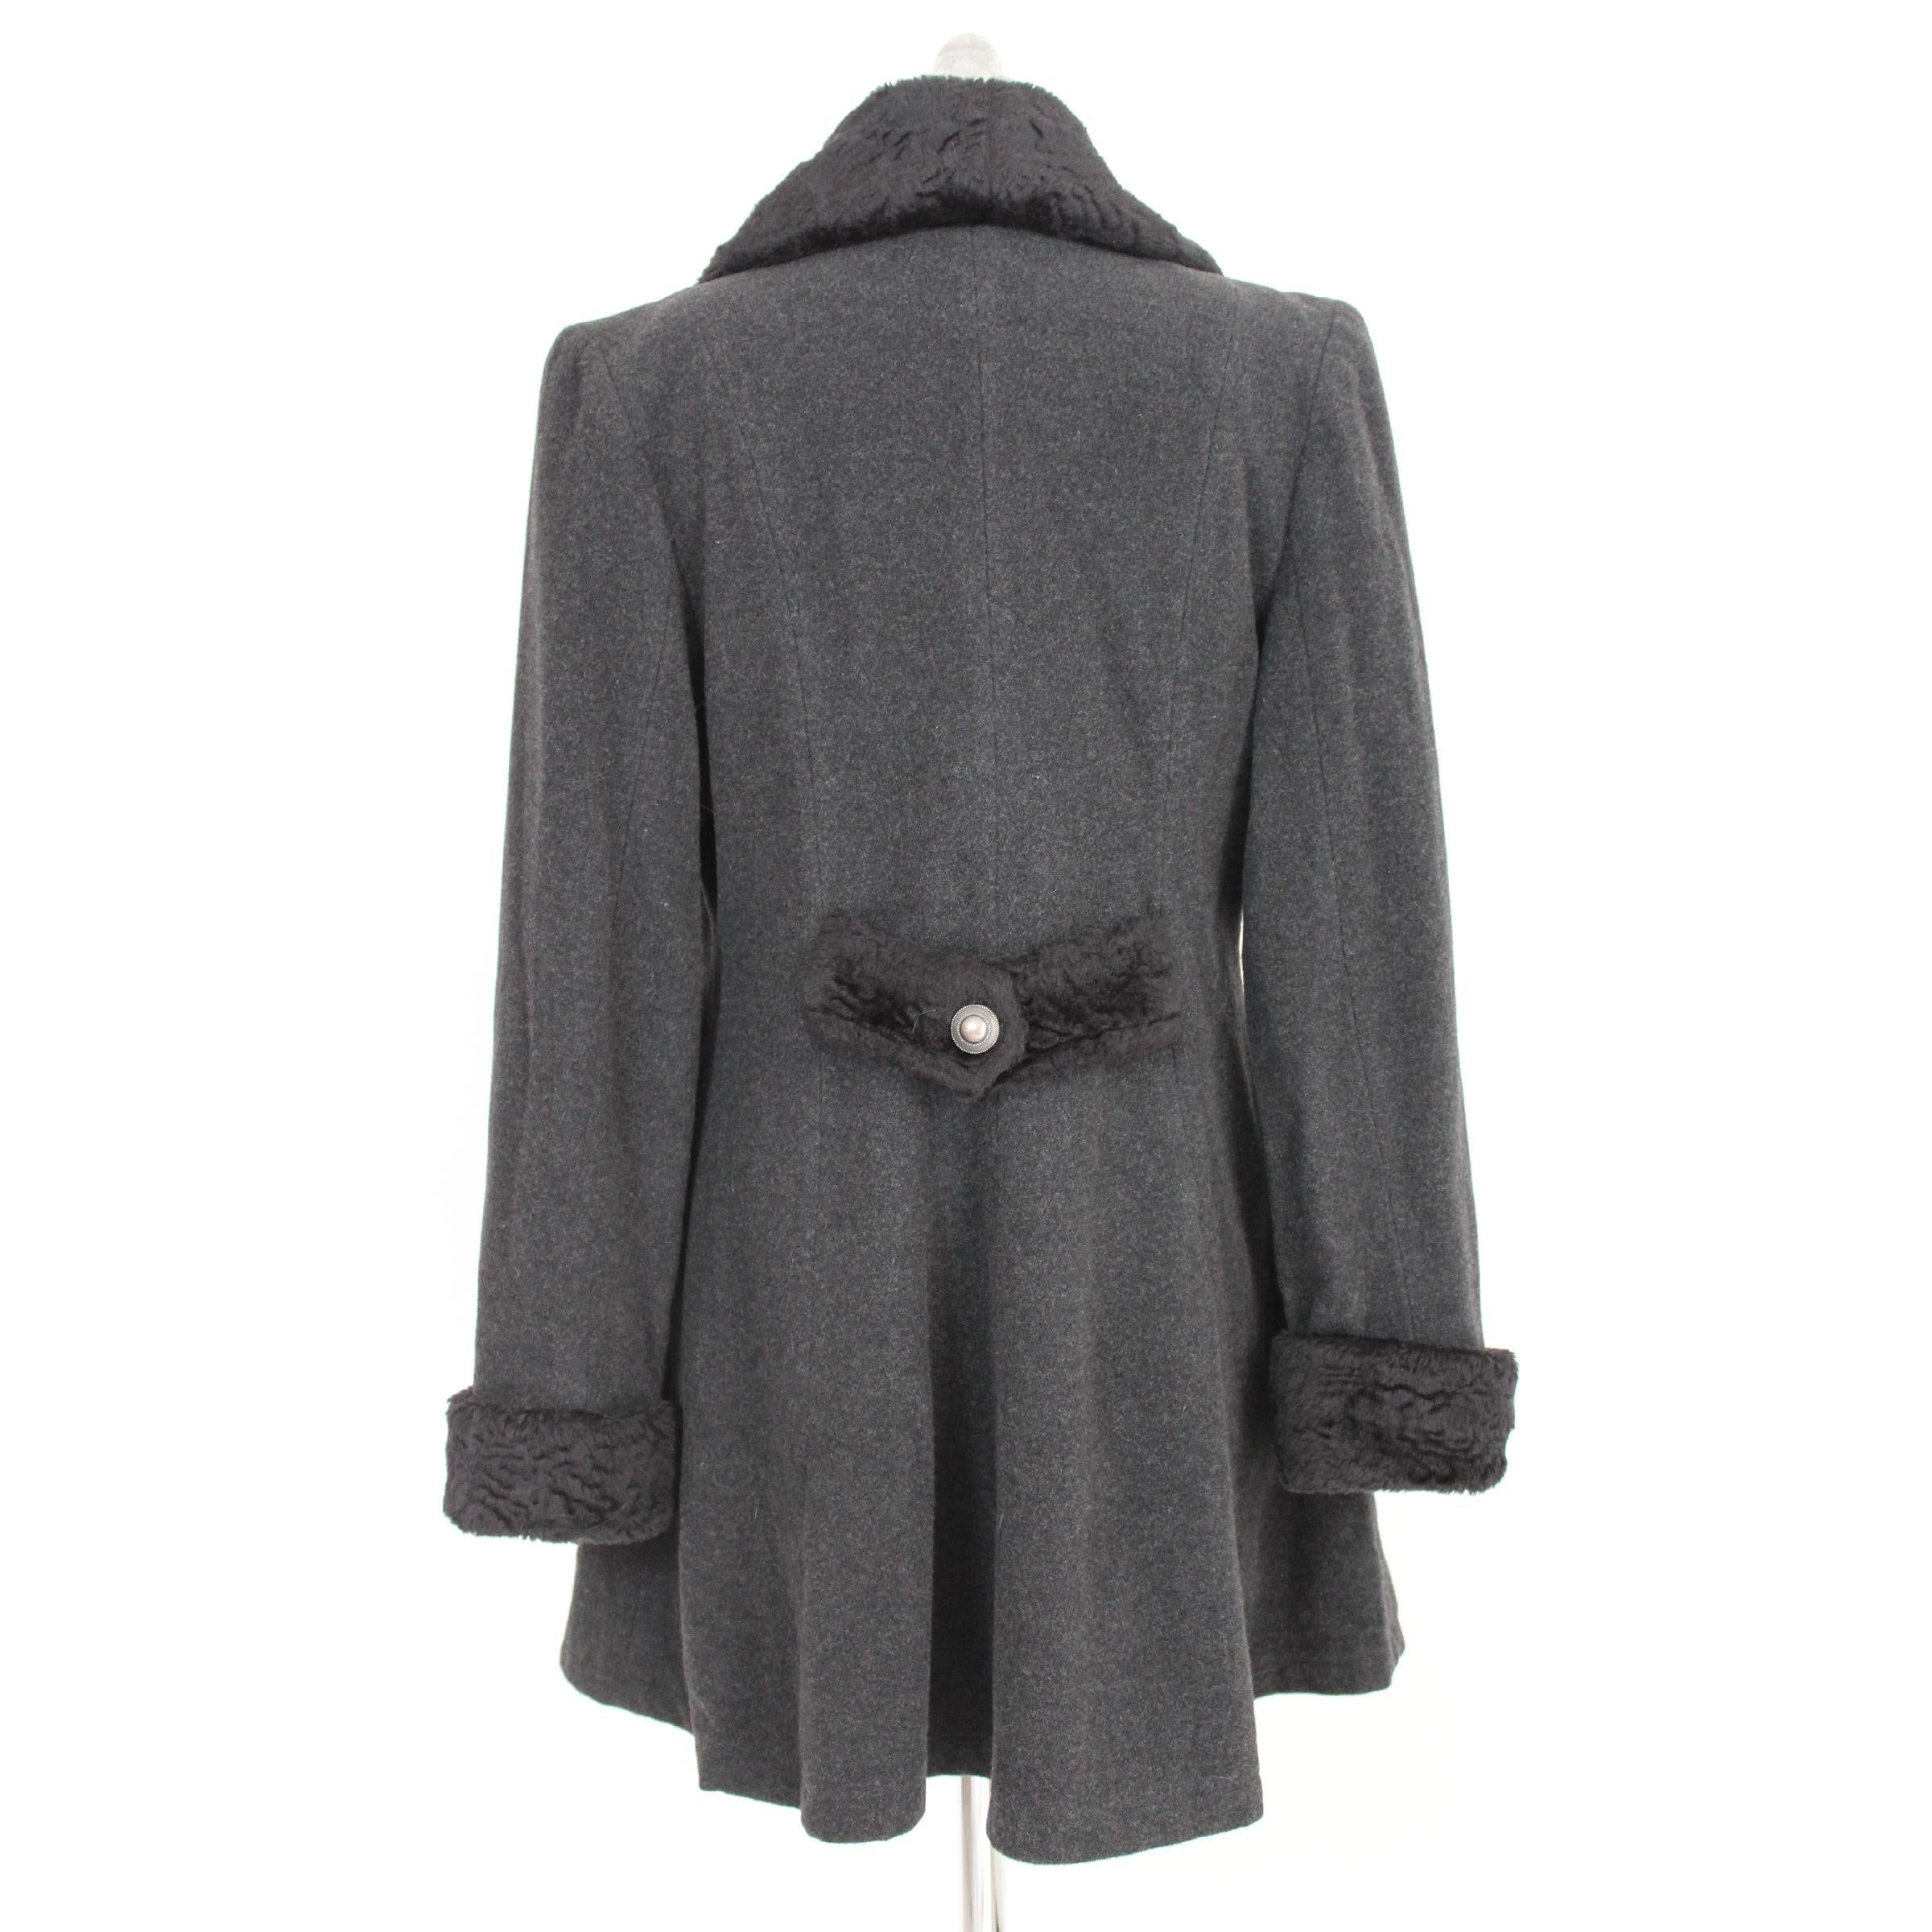 Christian Dior Boutique vintage 80s women's coat. Double-breasted model in anthracite gray, wool fabric with black faux fur collar and cuffs. Lined interior. Made in France. Excellent vintage condition.

Size: 46 It 12 Us 14 Uk

Shoulder: 46